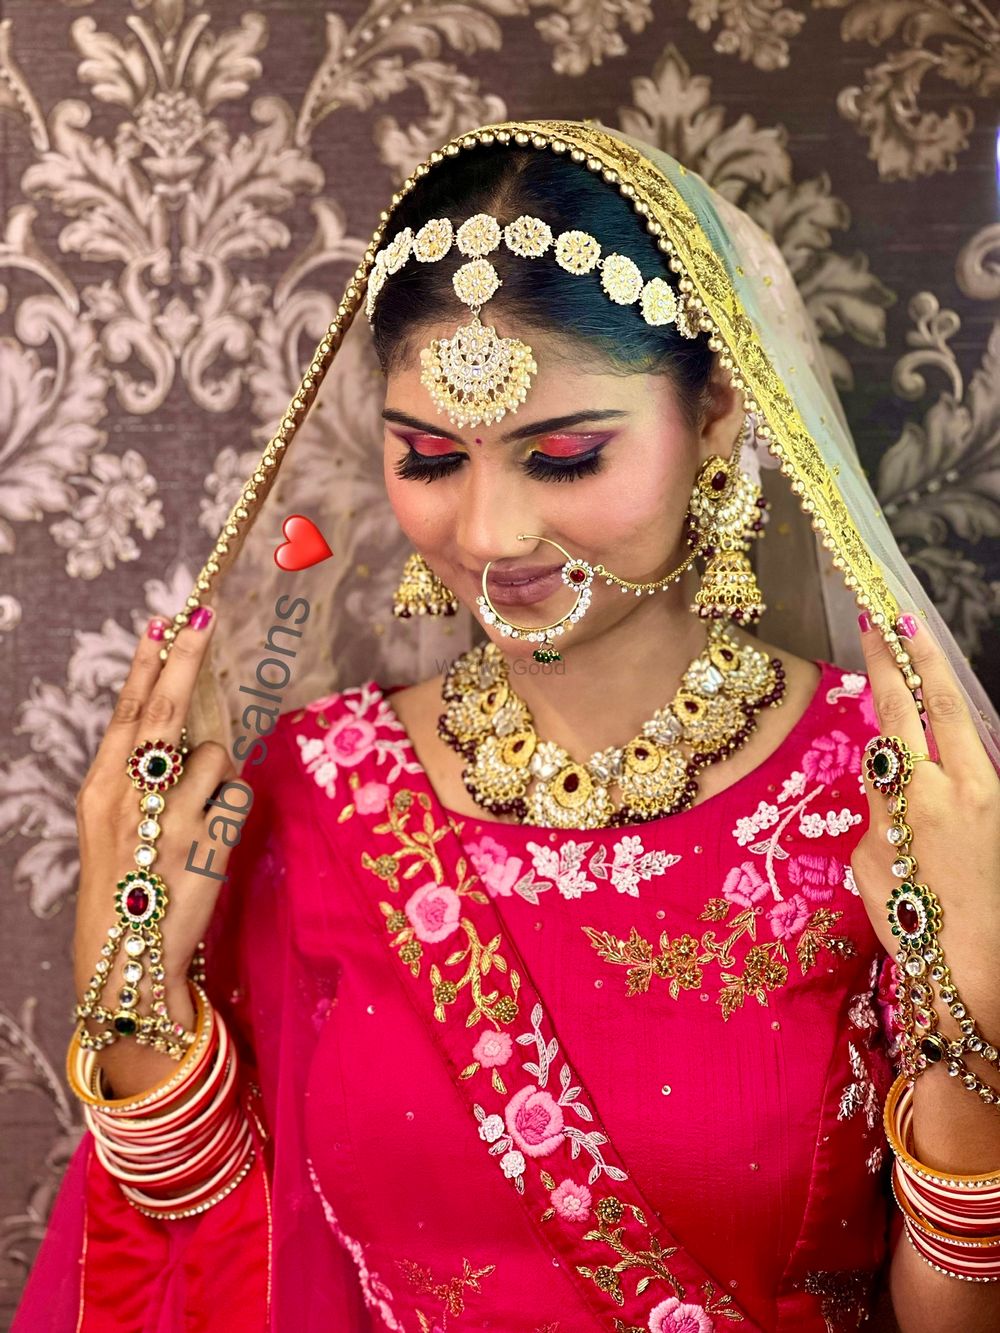 Photo From Bride Ankita - By Fab Salons